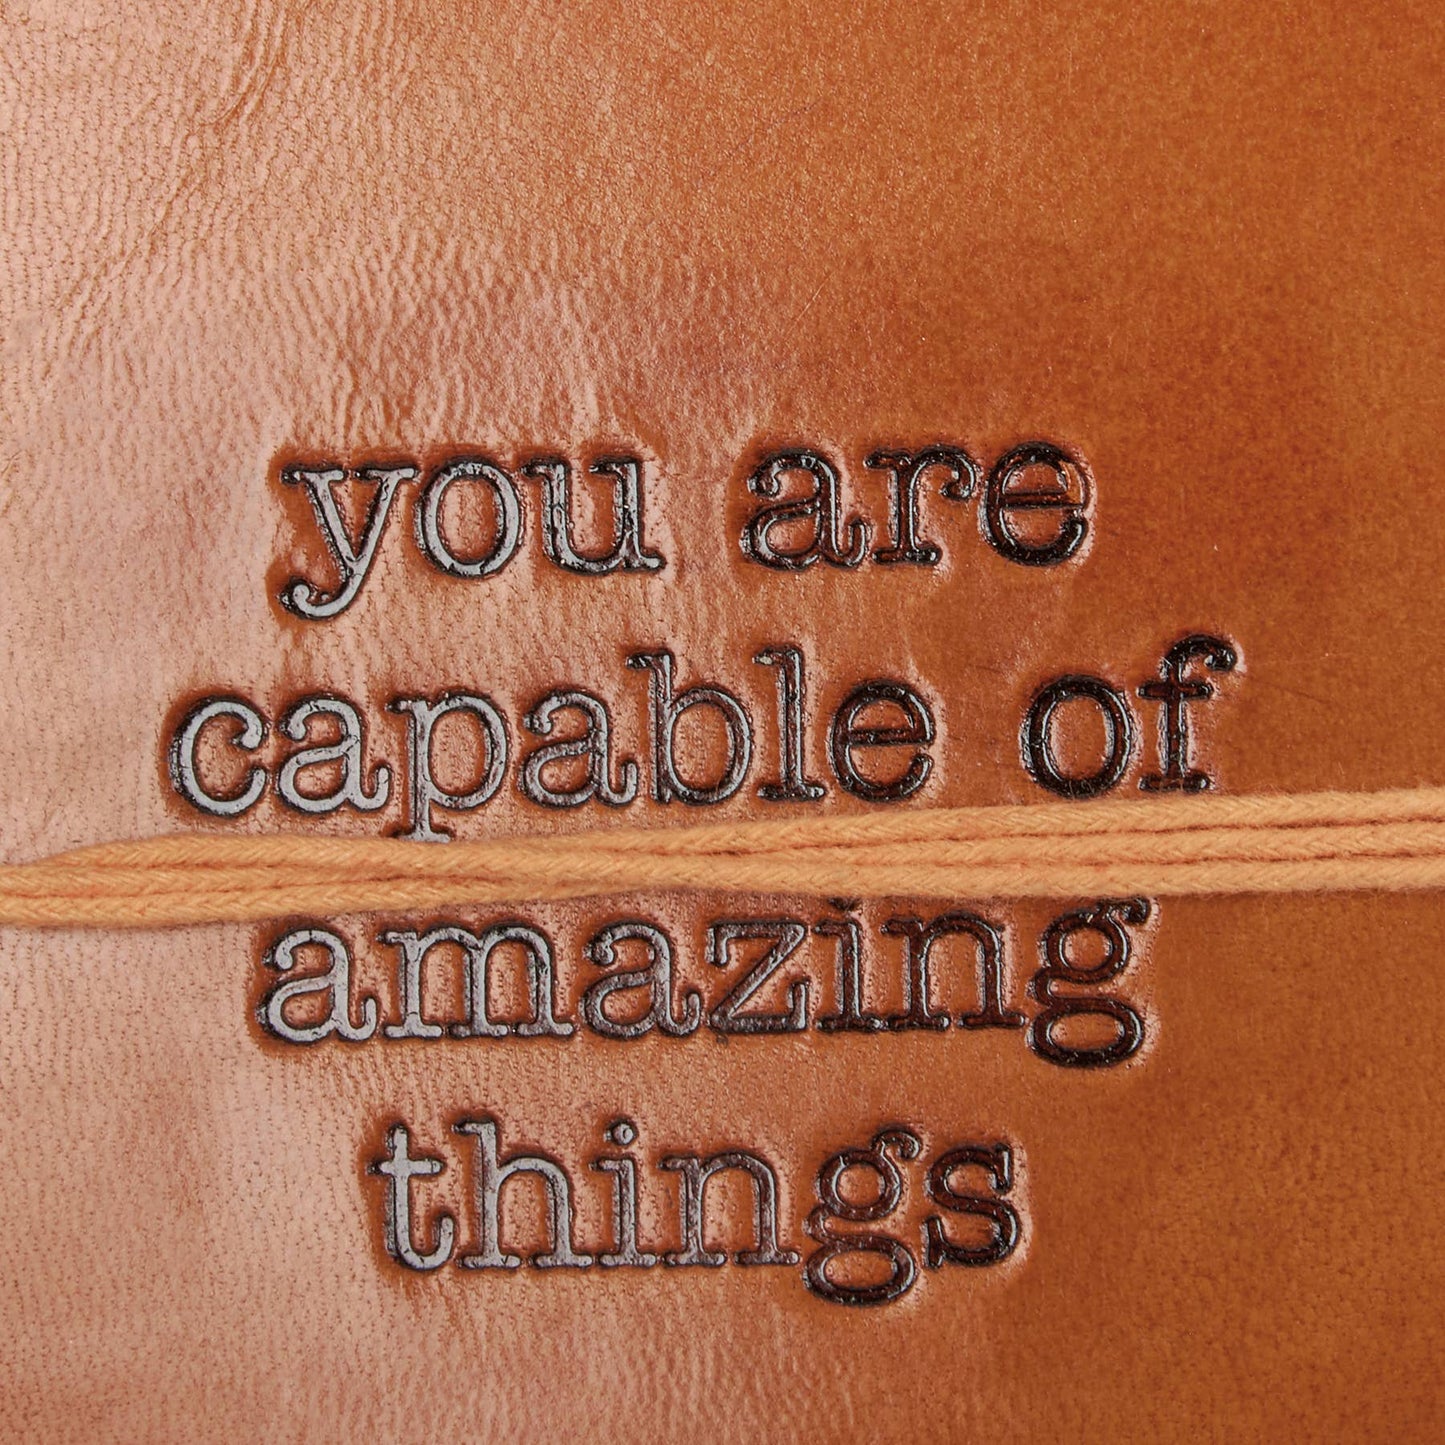 Capable Of Amazing Things Journal